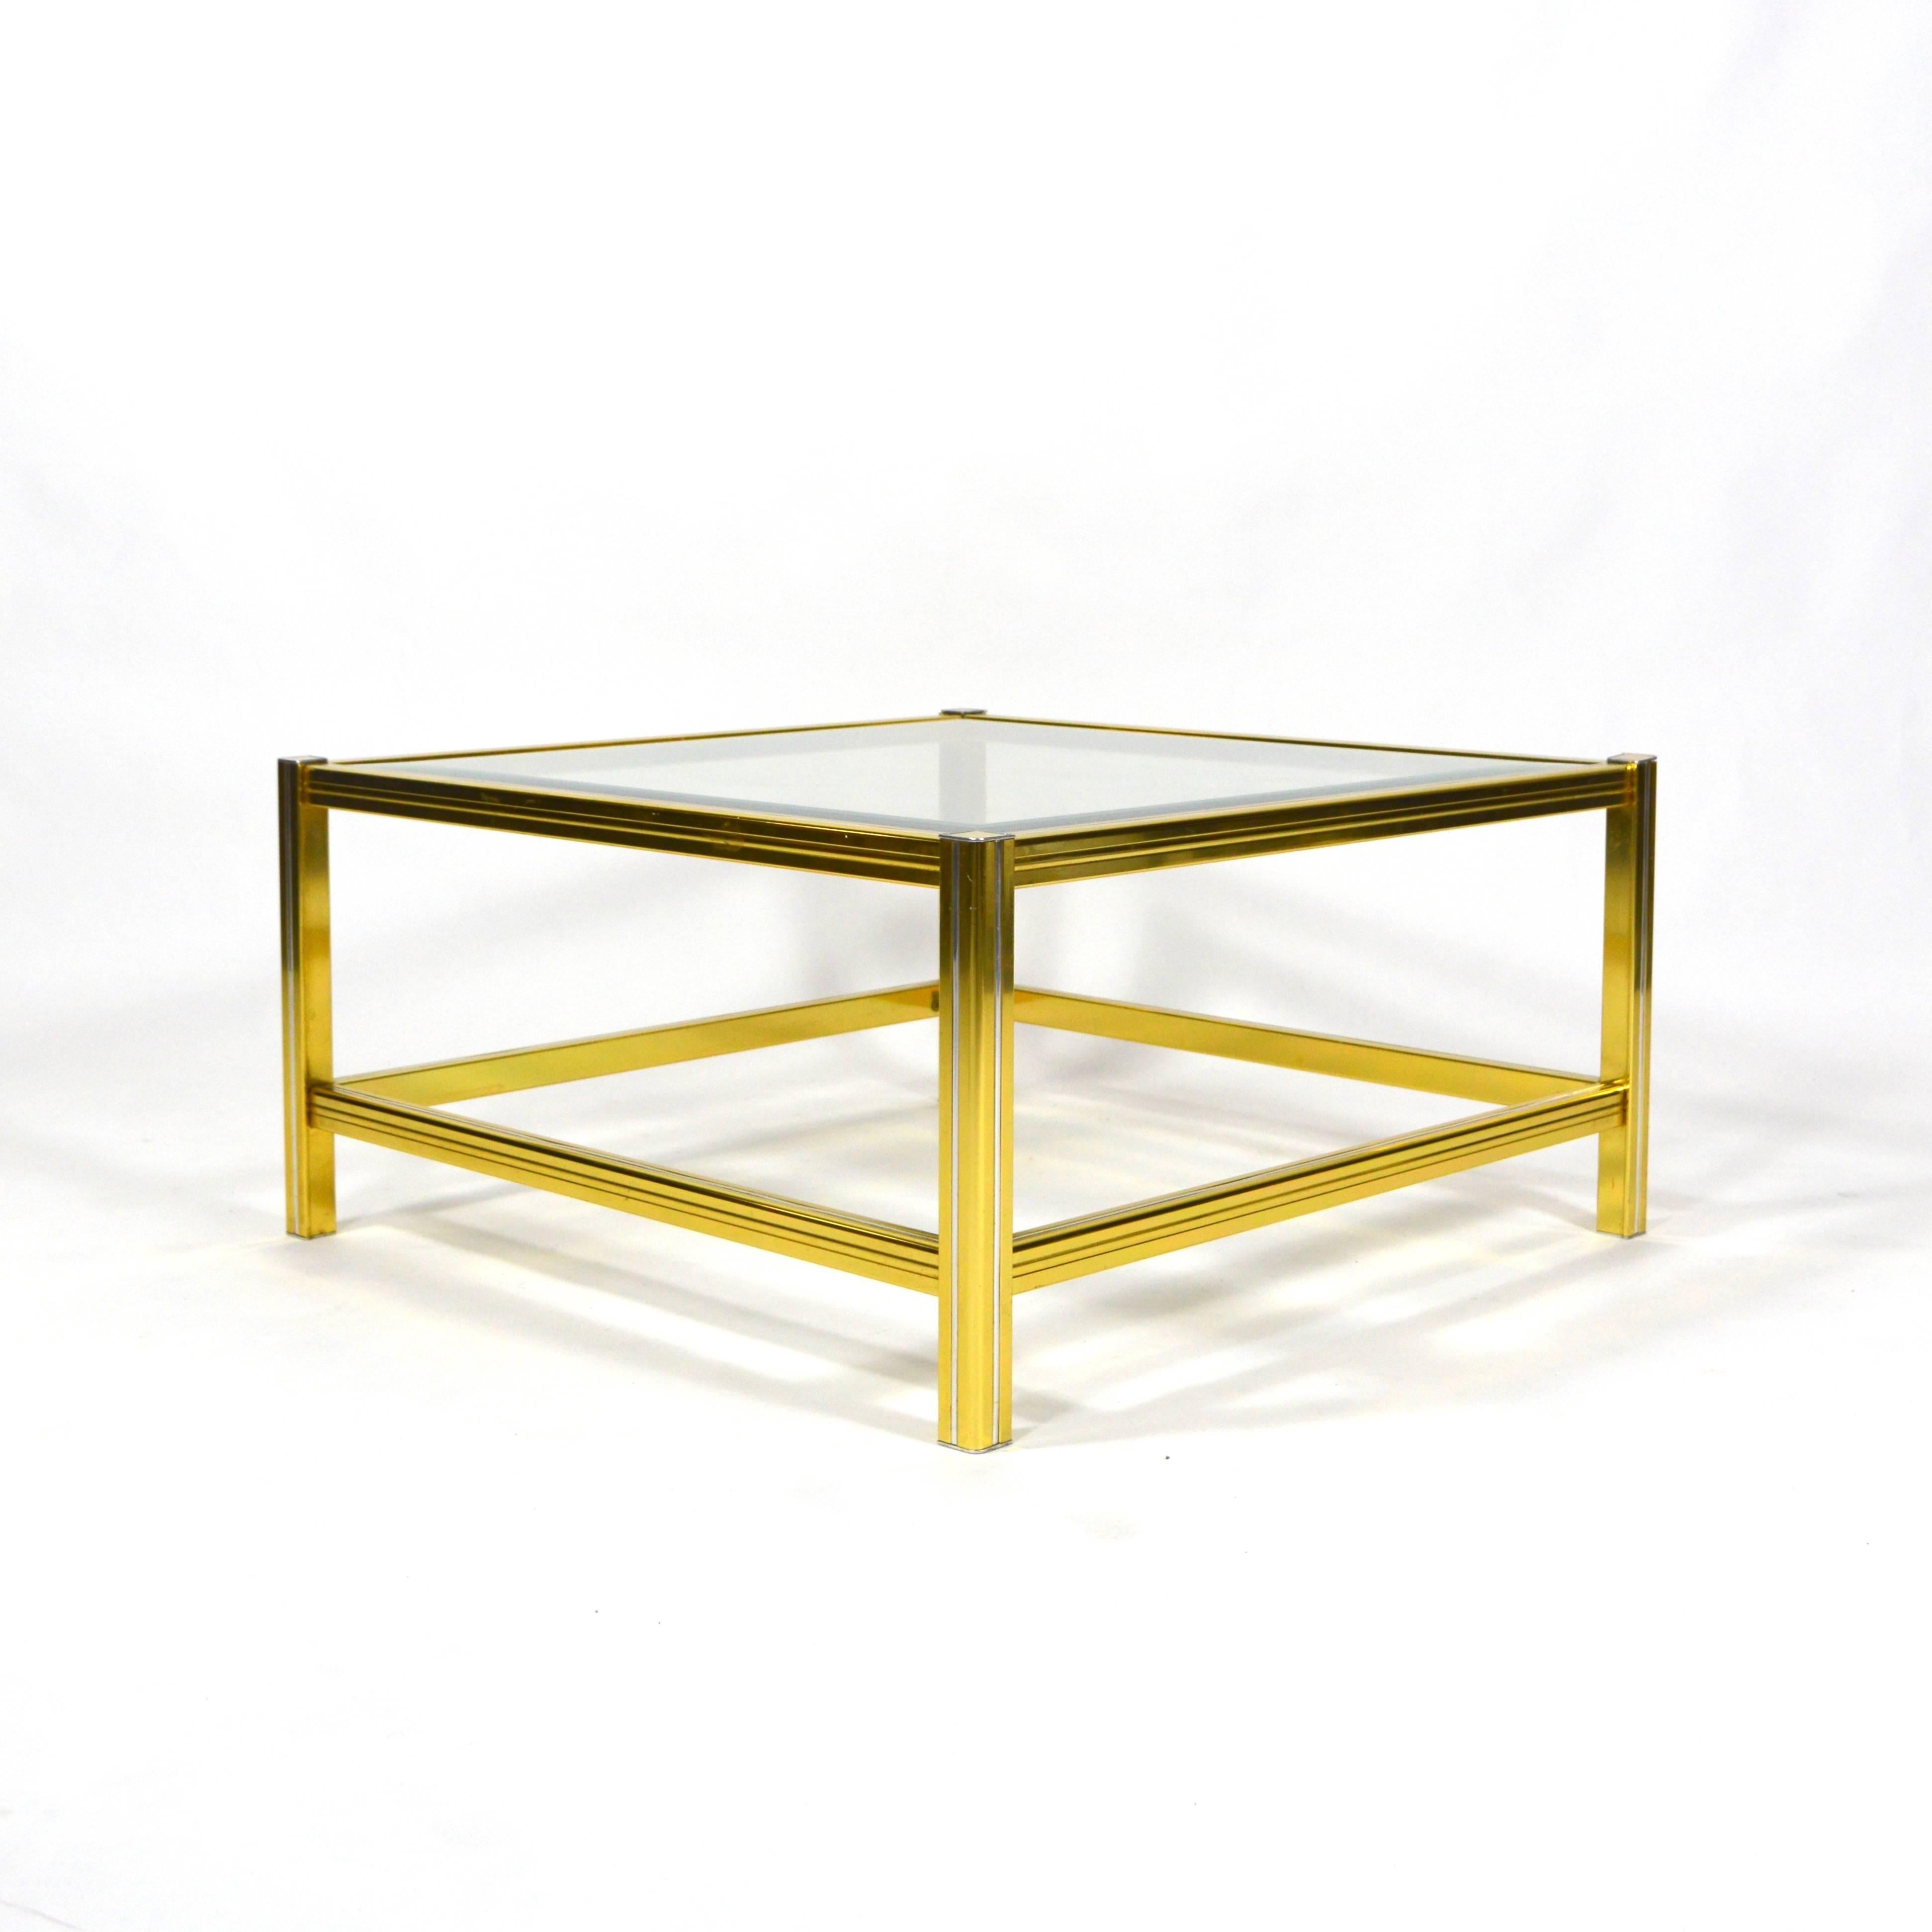 Beautiful Italian coffee table.
It is made of brass with chrome details and has a glass top with cut edges.
In good condition with normal age related signs of use.
 